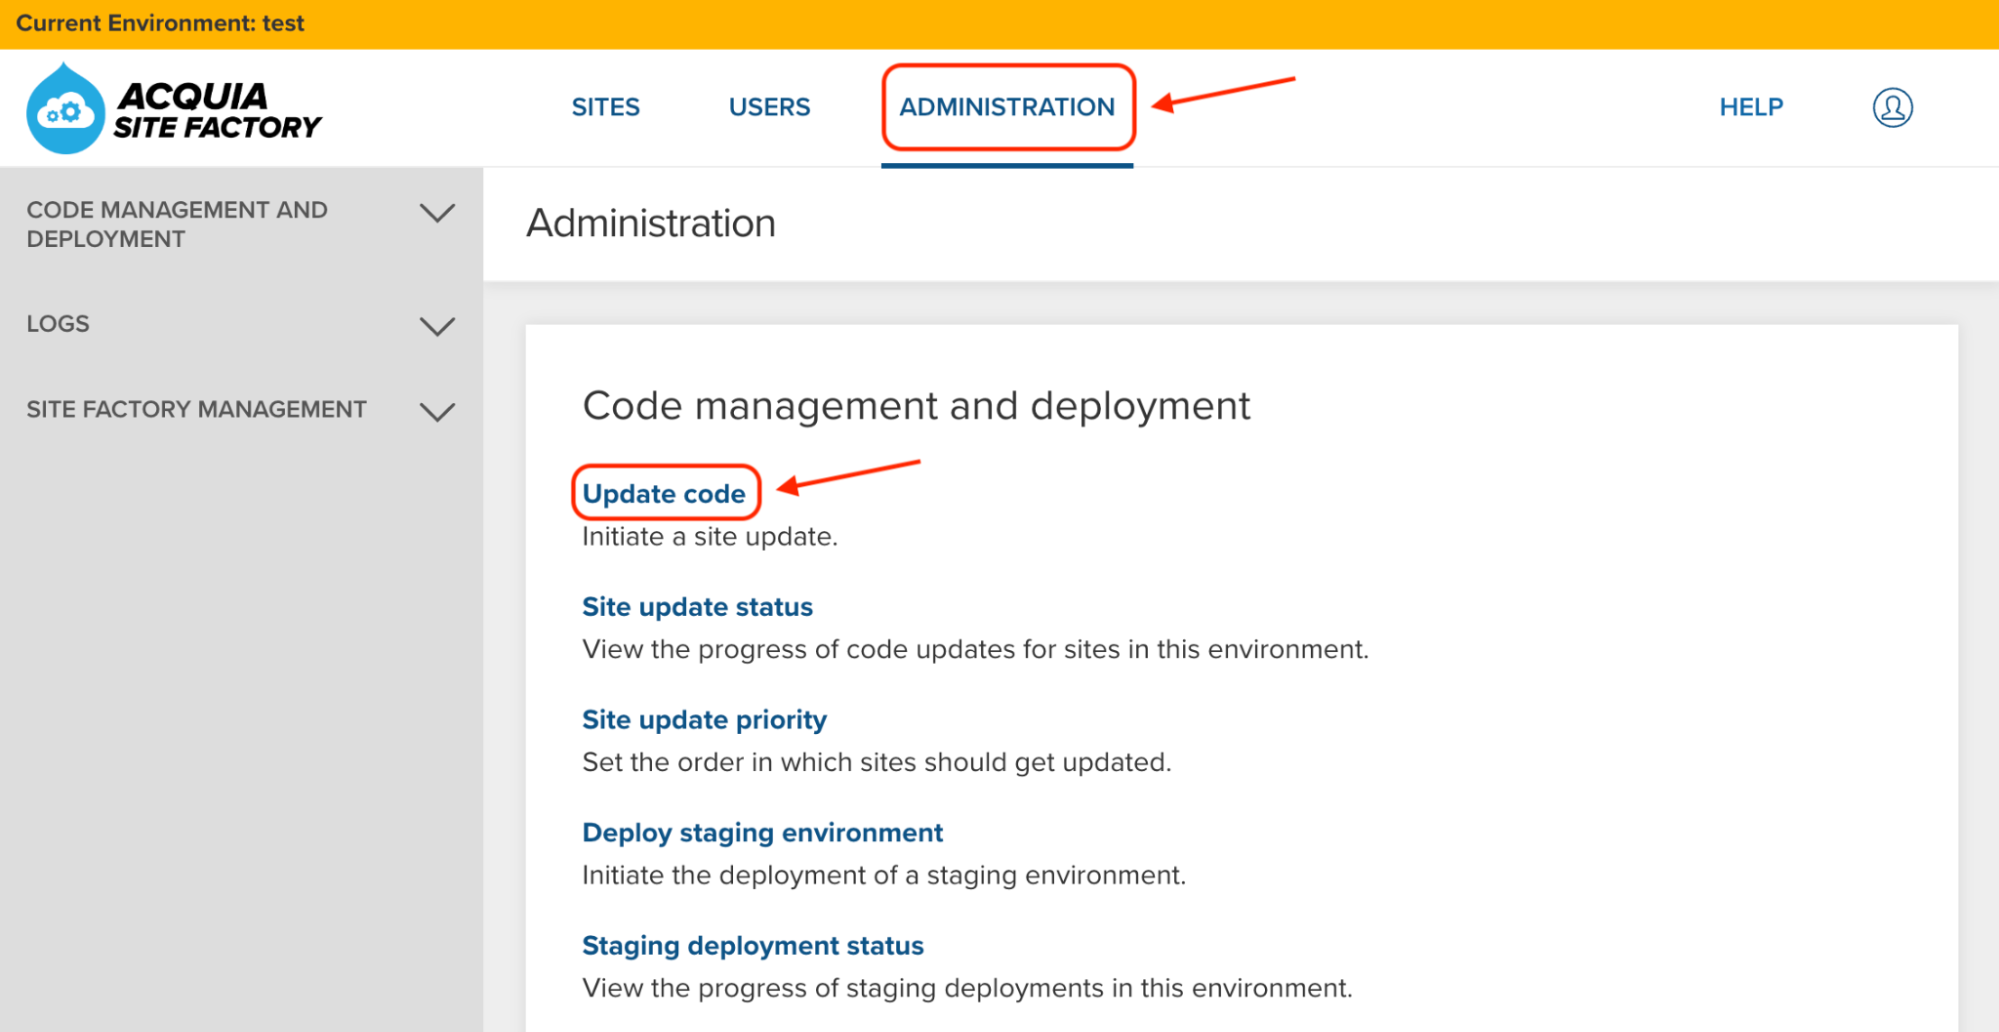 Go to Administration and select Update code.